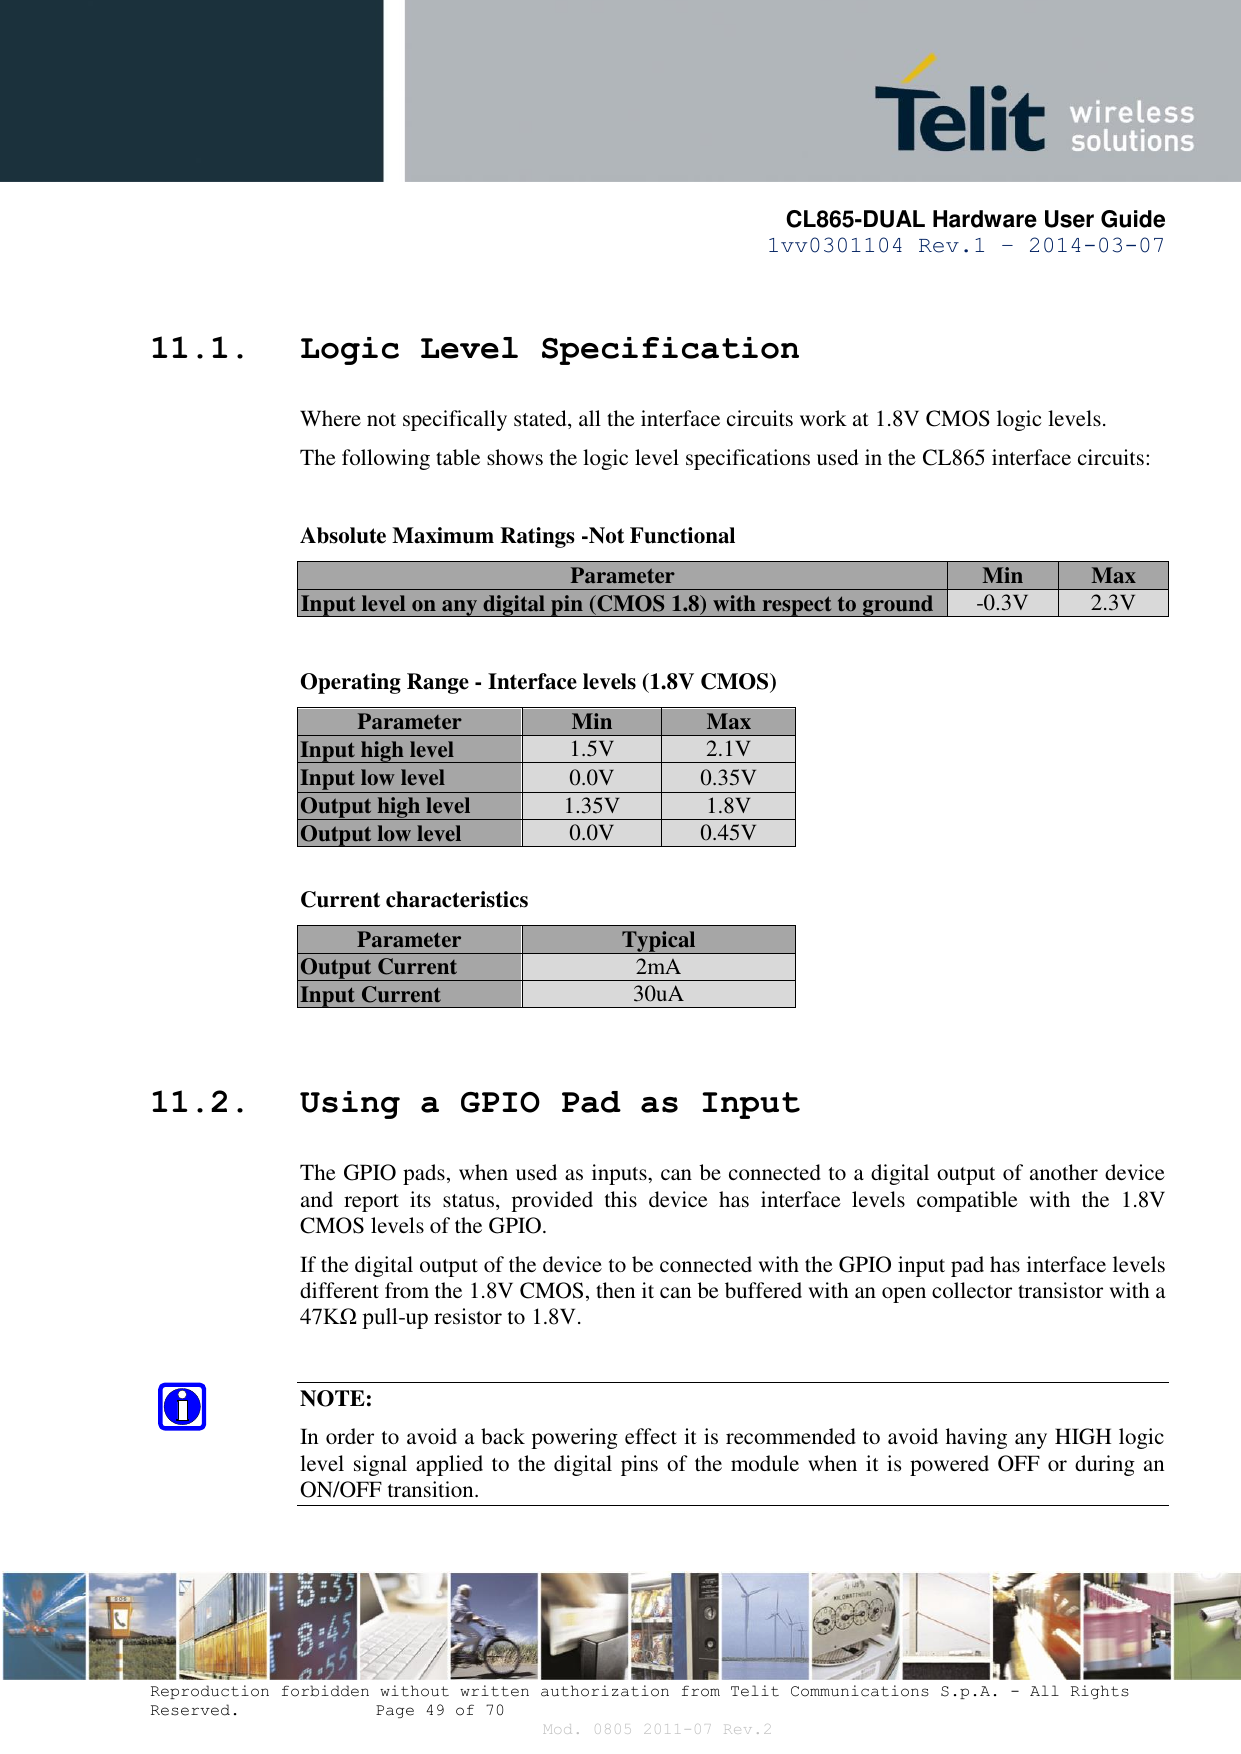       CL865-DUAL Hardware User Guide 1vv0301104 Rev.1 – 2014-03-07  Reproduction forbidden without written authorization from Telit Communications S.p.A. - All Rights Reserved.    Page 49 of 70 Mod. 0805 2011-07 Rev.2 11.1. Logic Level Specification Where not specifically stated, all the interface circuits work at 1.8V CMOS logic levels. The following table shows the logic level specifications used in the CL865 interface circuits:  Absolute Maximum Ratings -Not Functional Parameter Min Max Input level on any digital pin (CMOS 1.8) with respect to ground -0.3V 2.3V  Operating Range - Interface levels (1.8V CMOS) Parameter Min Max Input high level 1.5V 2.1V Input low level 0.0V 0.35V Output high level 1.35V 1.8V Output low level 0.0V 0.45V  Current characteristics  Parameter  Typical Output Current 2mA Input Current 30uA  11.2. Using a GPIO Pad as Input The GPIO pads, when used as inputs, can be connected to a digital output of another device and  report  its  status,  provided  this  device  has  interface  levels  compatible  with  the  1.8V CMOS levels of the GPIO.  If the digital output of the device to be connected with the GPIO input pad has interface levels different from the 1.8V CMOS, then it can be buffered with an open collector transistor with a 47KΩ pull-up resistor to 1.8V.  NOTE: In order to avoid a back powering effect it is recommended to avoid having any HIGH logic level signal applied to the digital pins of the module when it is powered OFF or during an ON/OFF transition.  